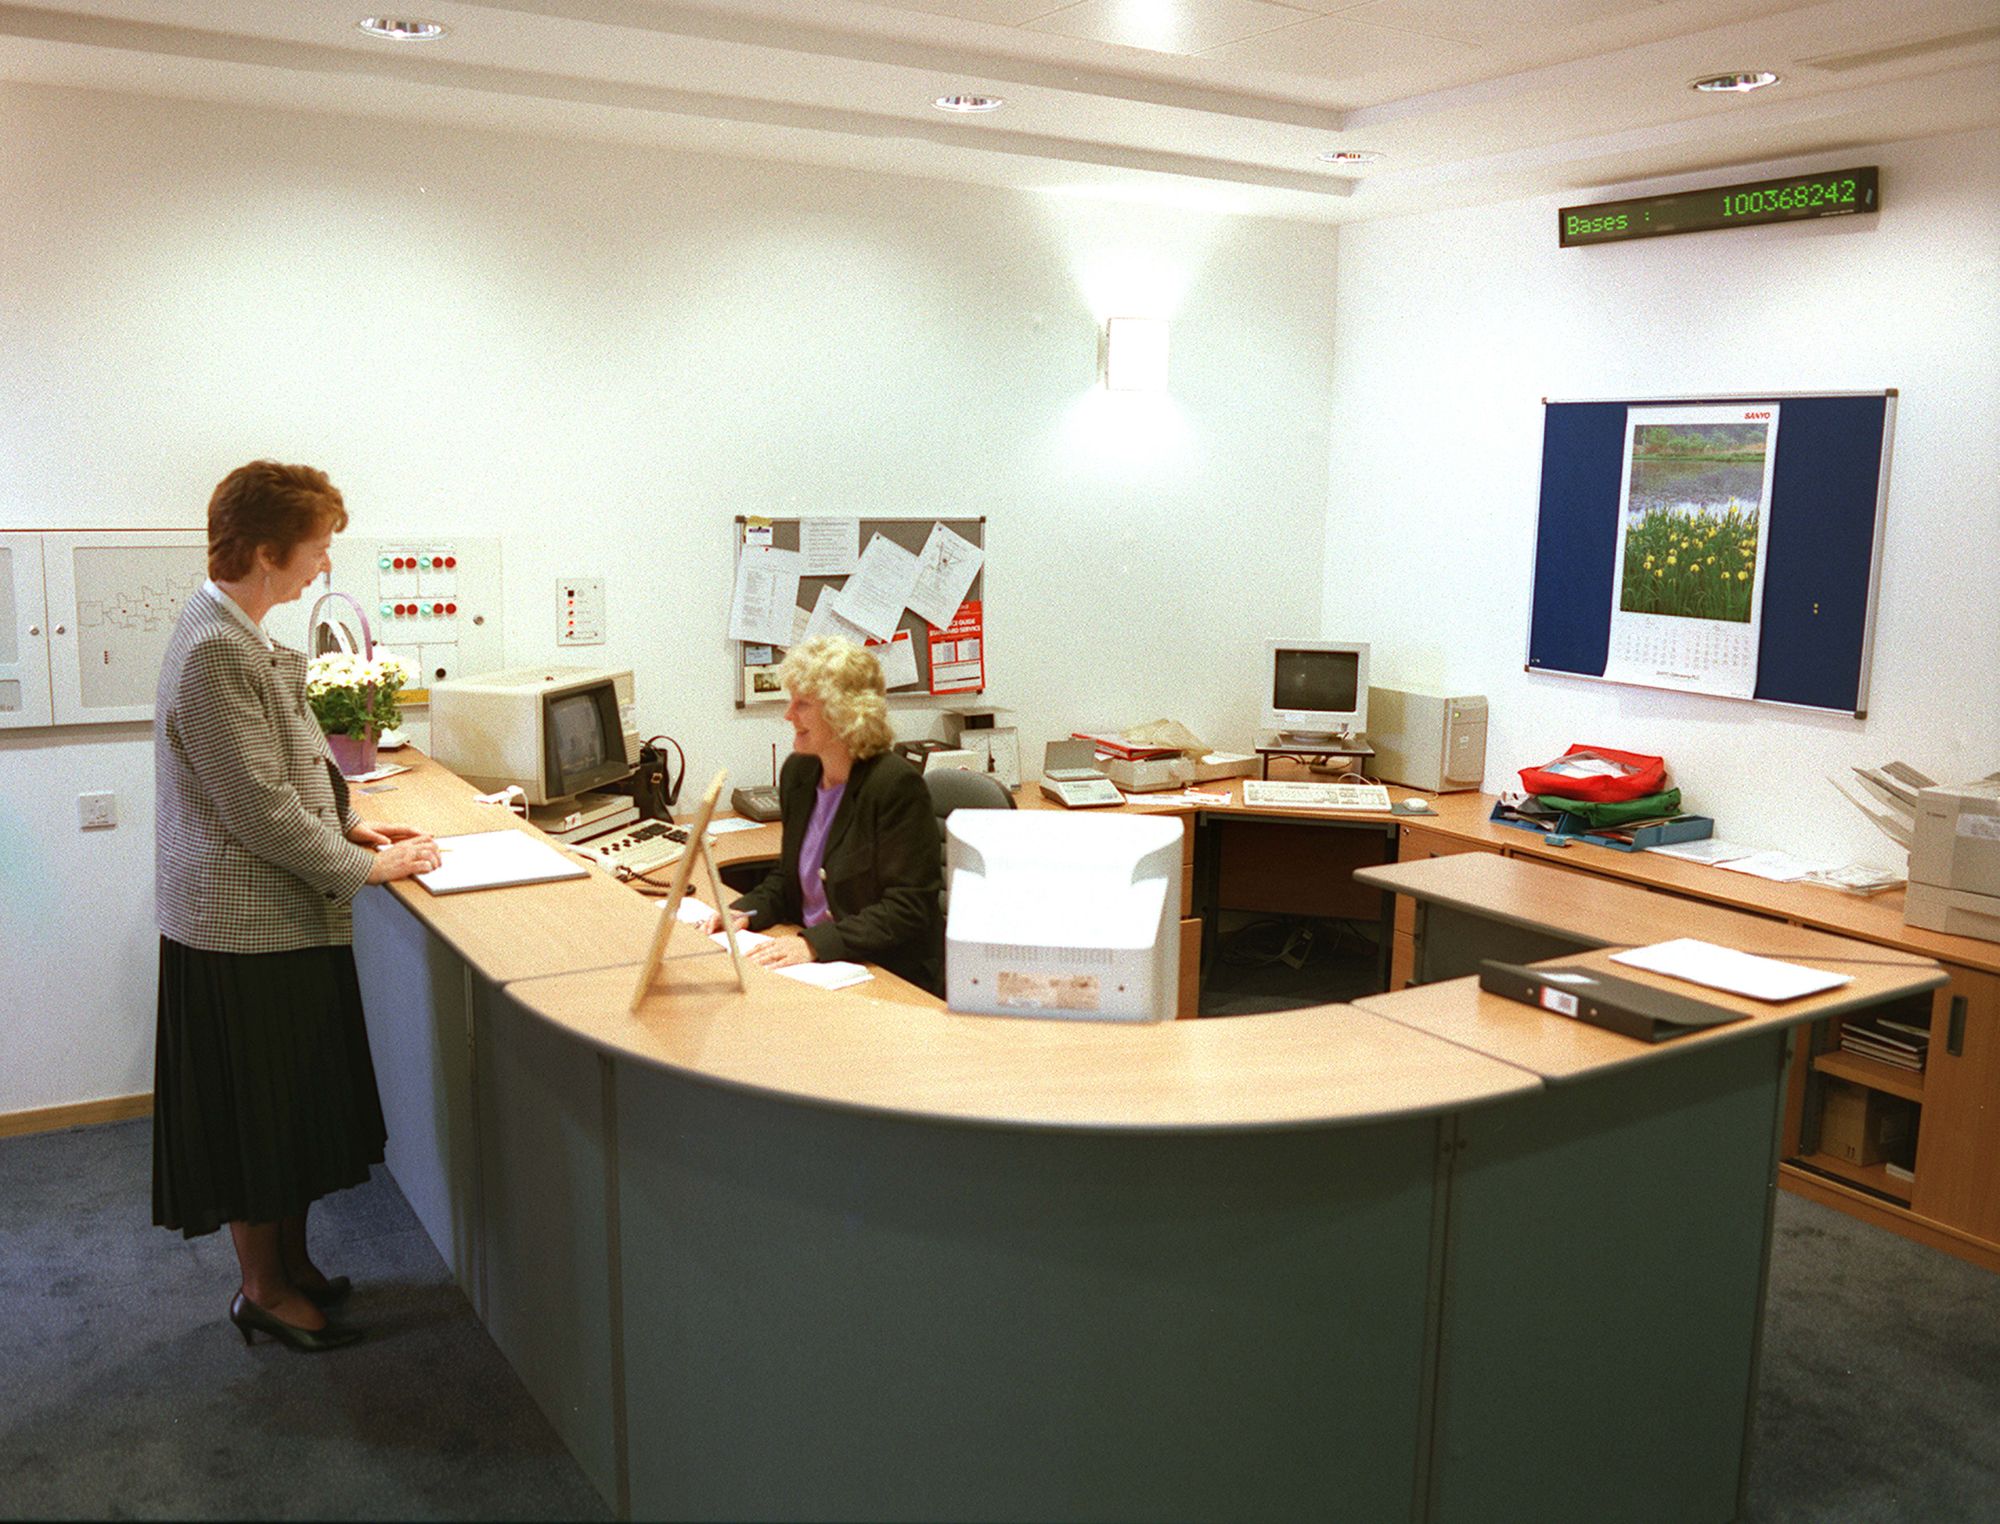 Two women are chatting on either side of a reception desk, one standing and one sitting. Behind them, a digital counter with the word Bases displays the number: 100368242